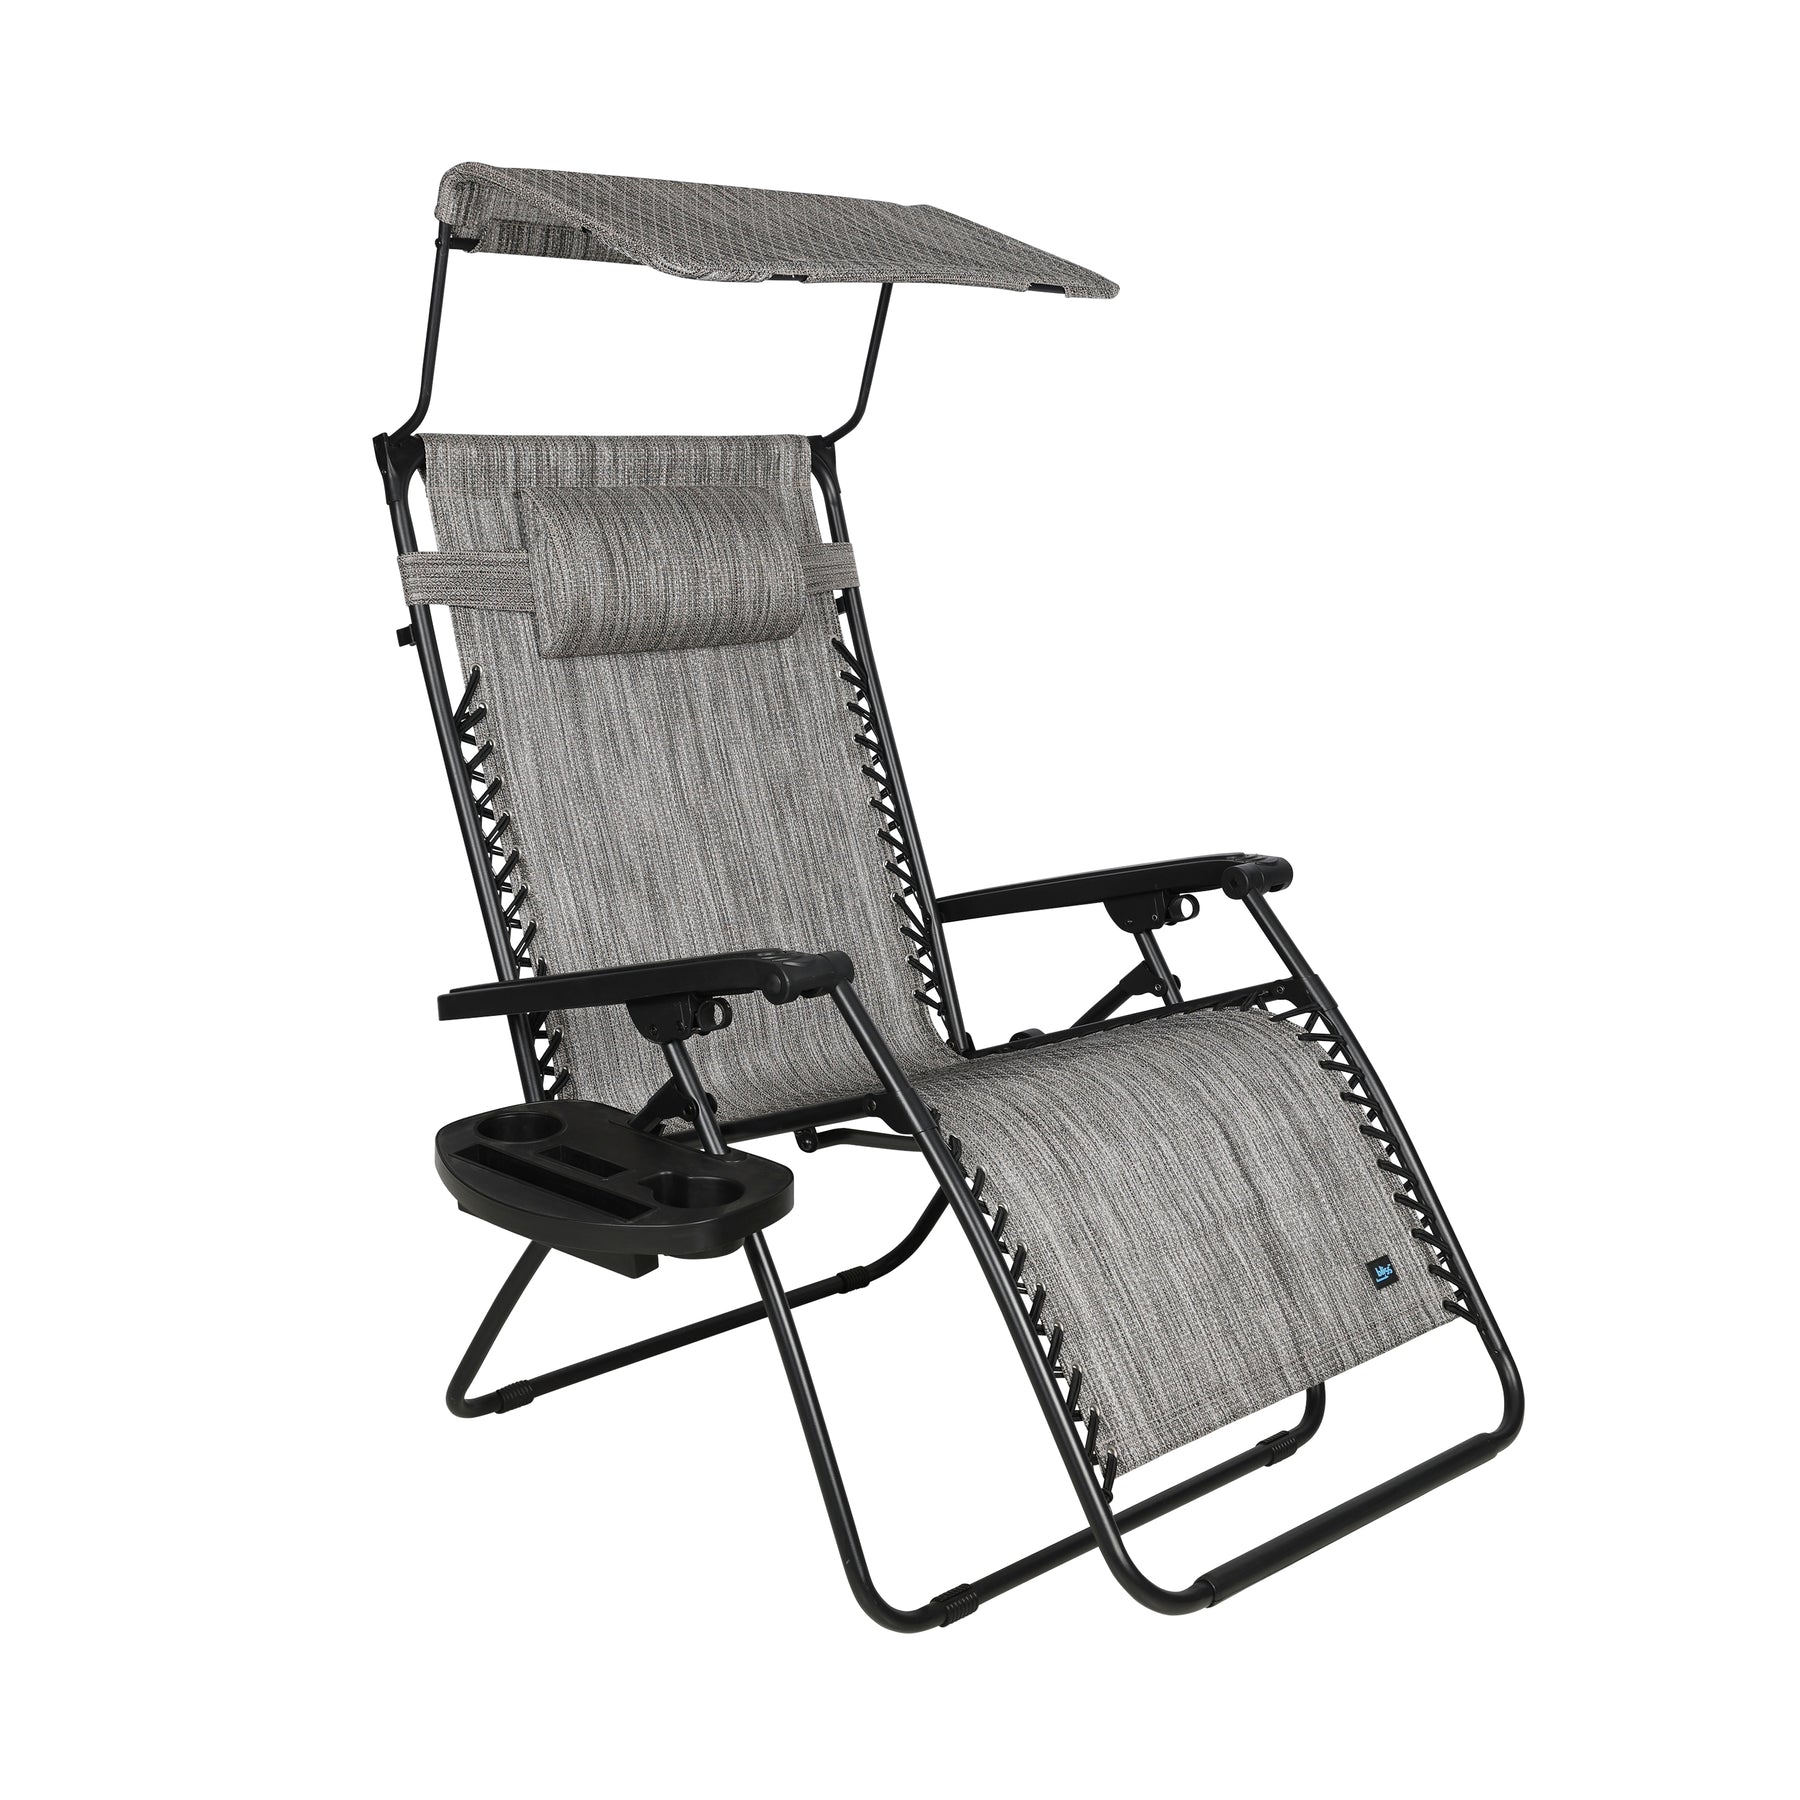 Bliss Hammocks 33-inch Wide XXL Zero Gravity Chair with Adjustable Canopy Sun-Shade, Drink Tray, and Adjustable Pillow in the platinum variation.